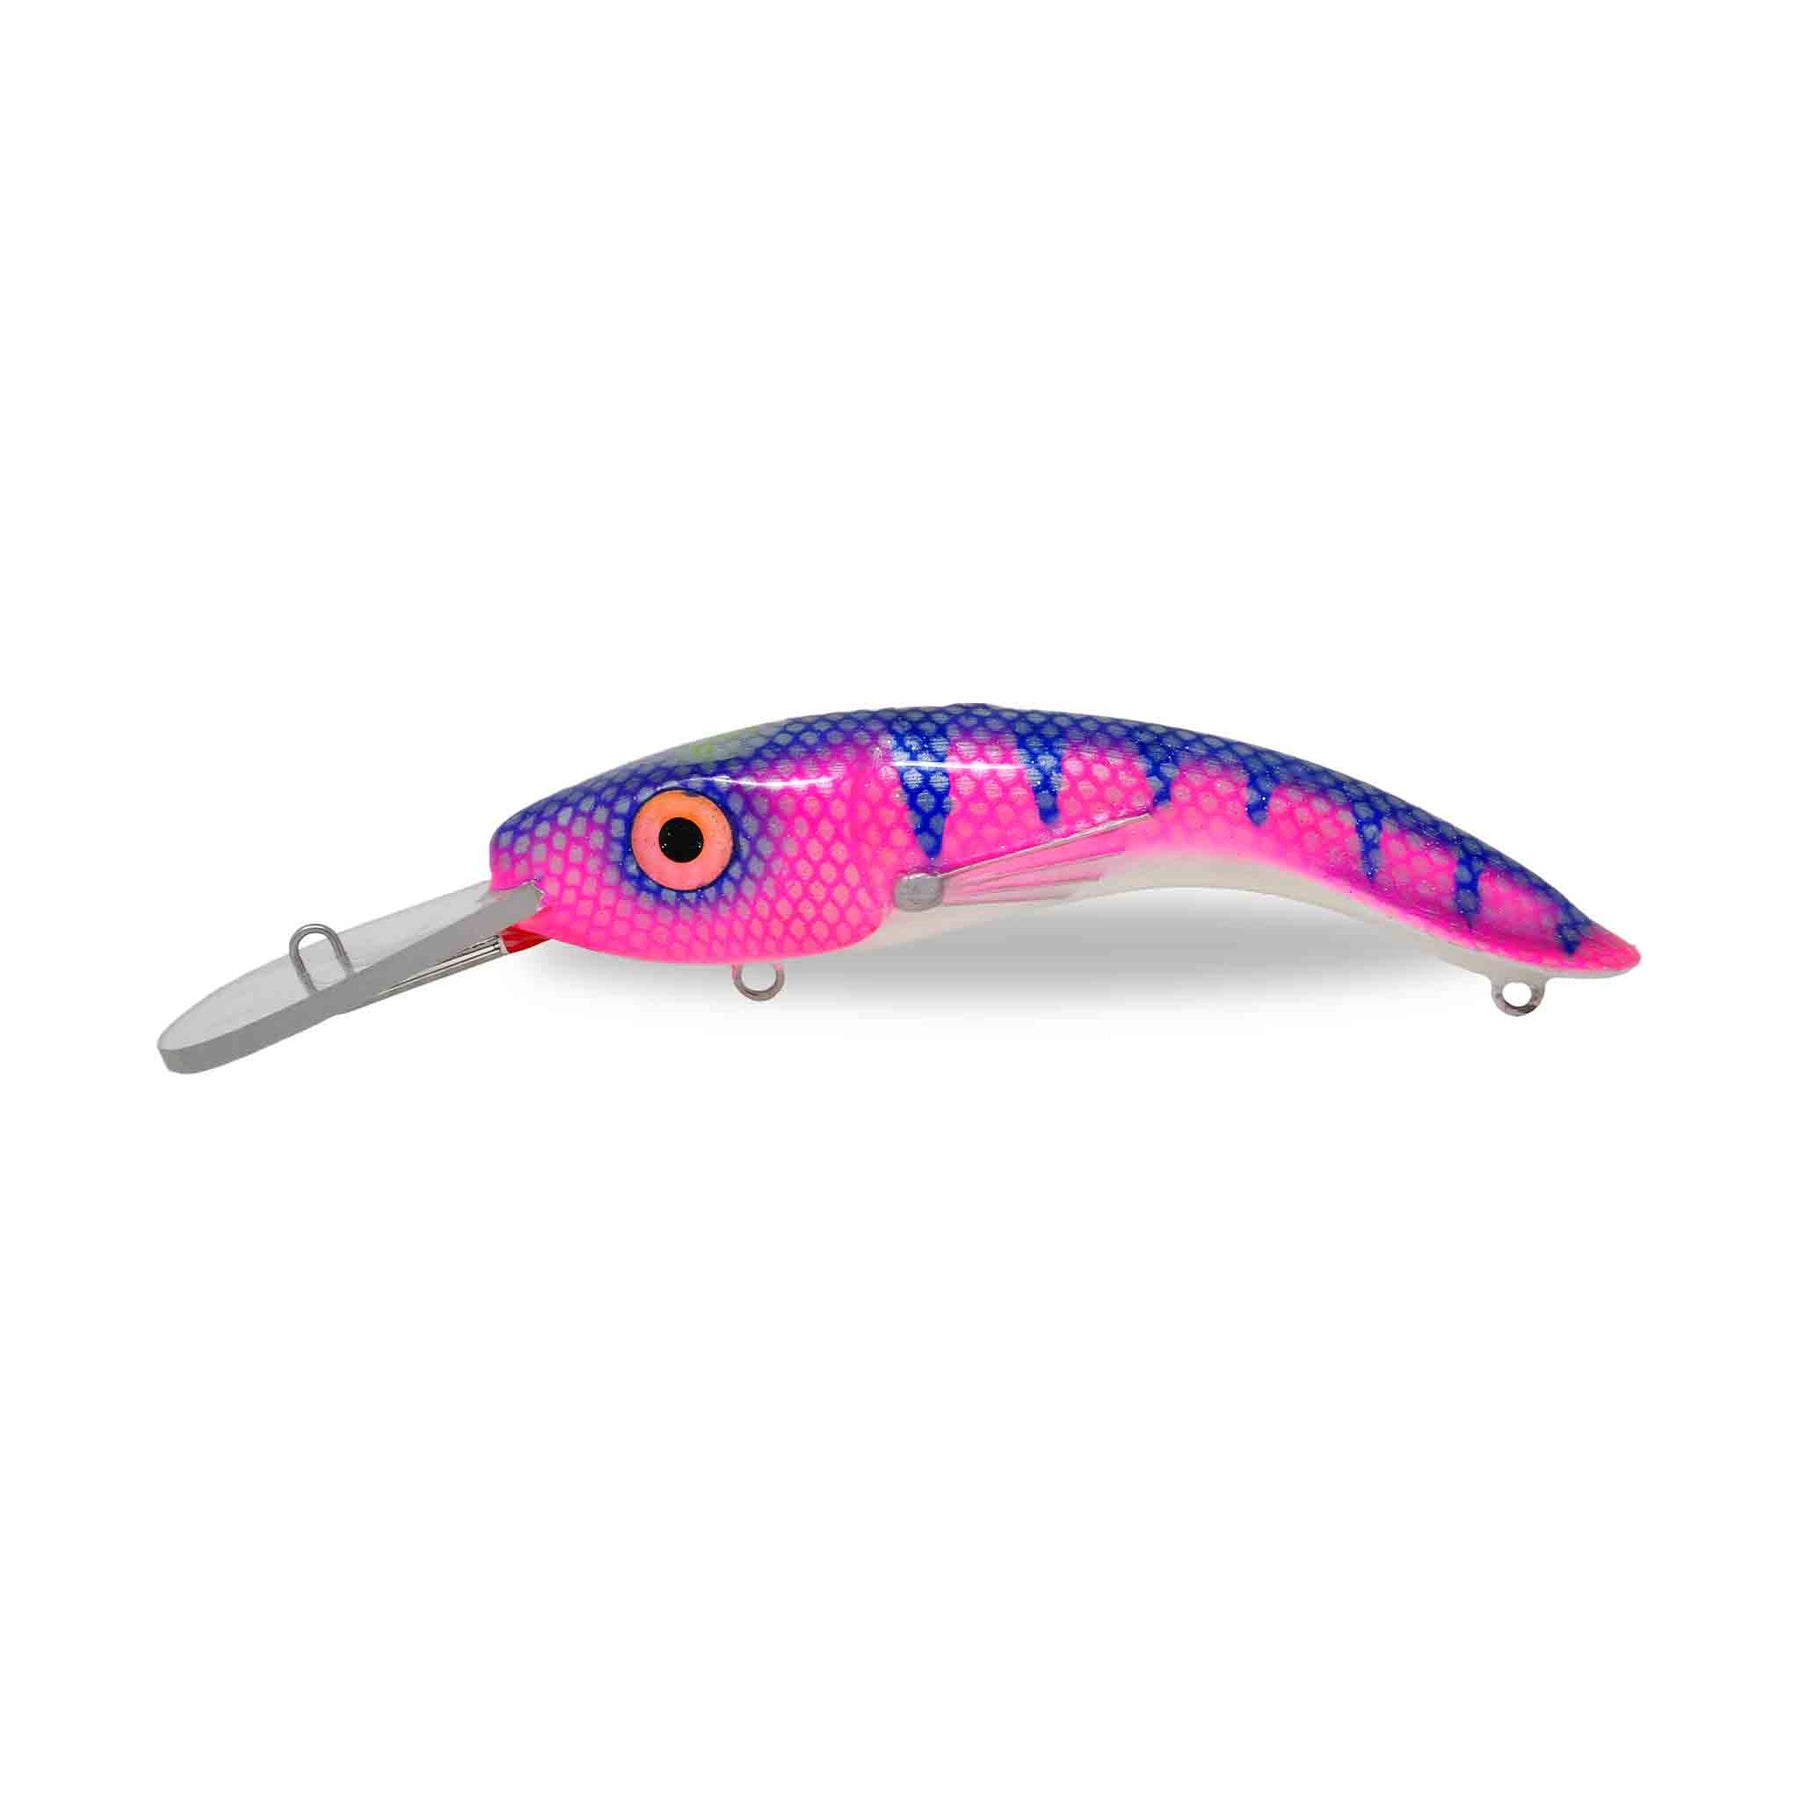 View of Crankbaits One Shot Tackle Perchosaurus 7" Crankbait Pink Tiger available at EZOKO Pike and Musky Shop